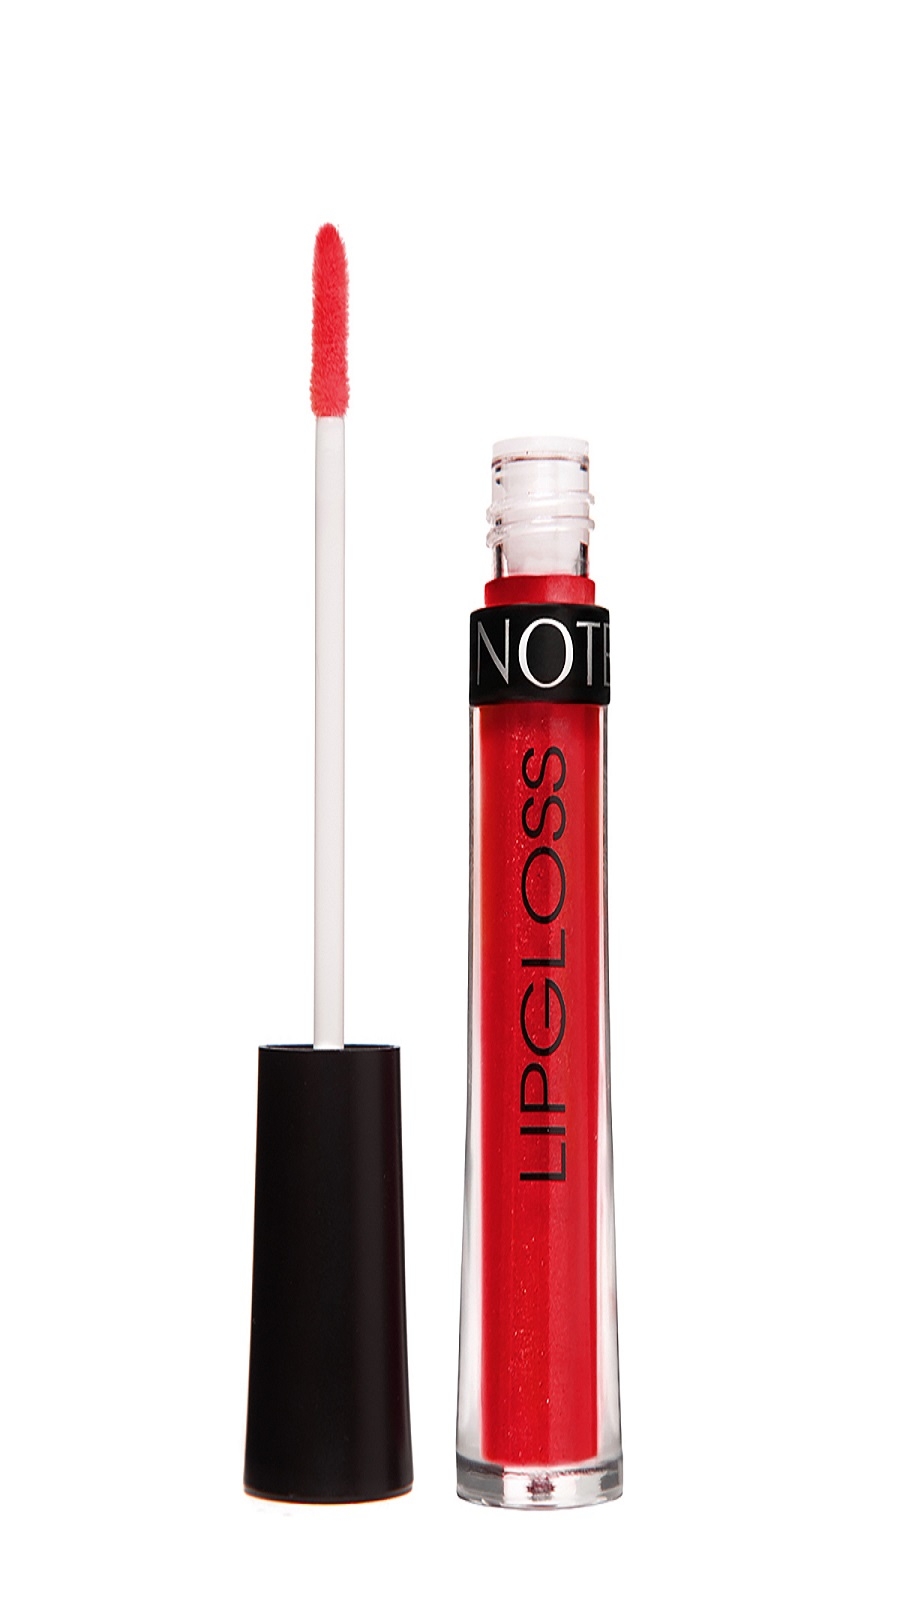 NOTE | Delicious Red Lip Gloss 3